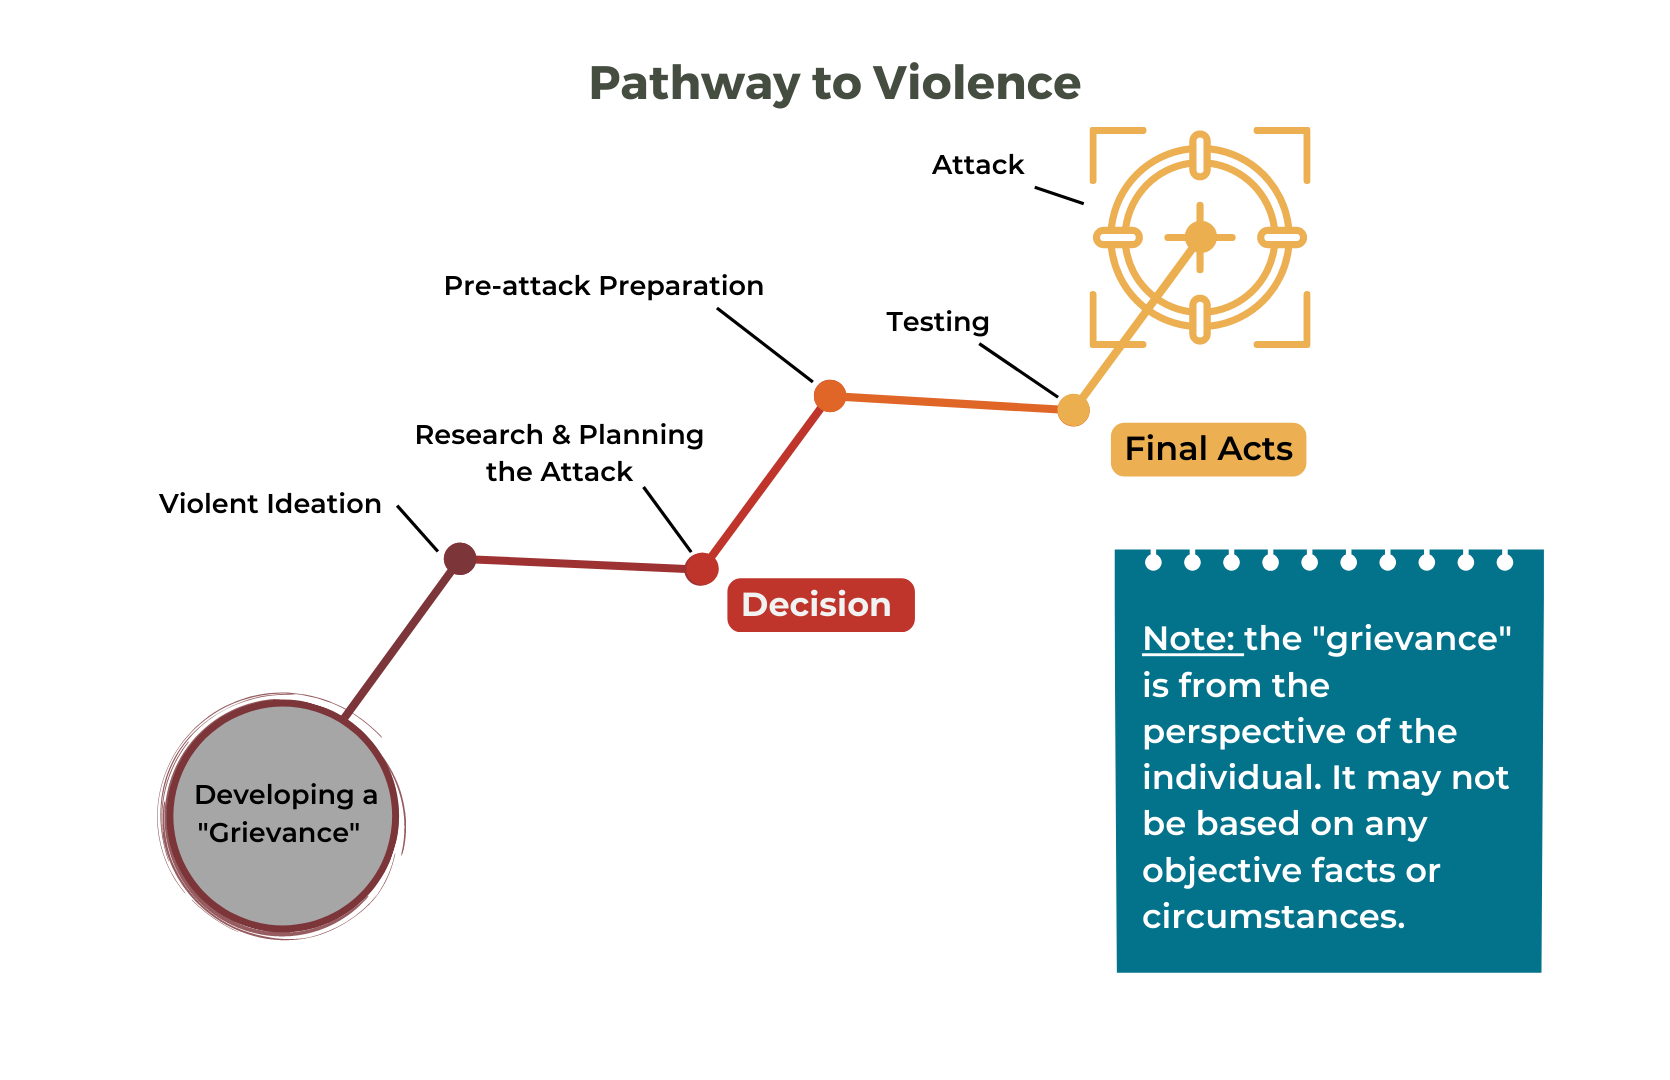 Diagram showing the pathway to violence escalation.  It starts with Developing a “grievance” (note that the grievance is from th